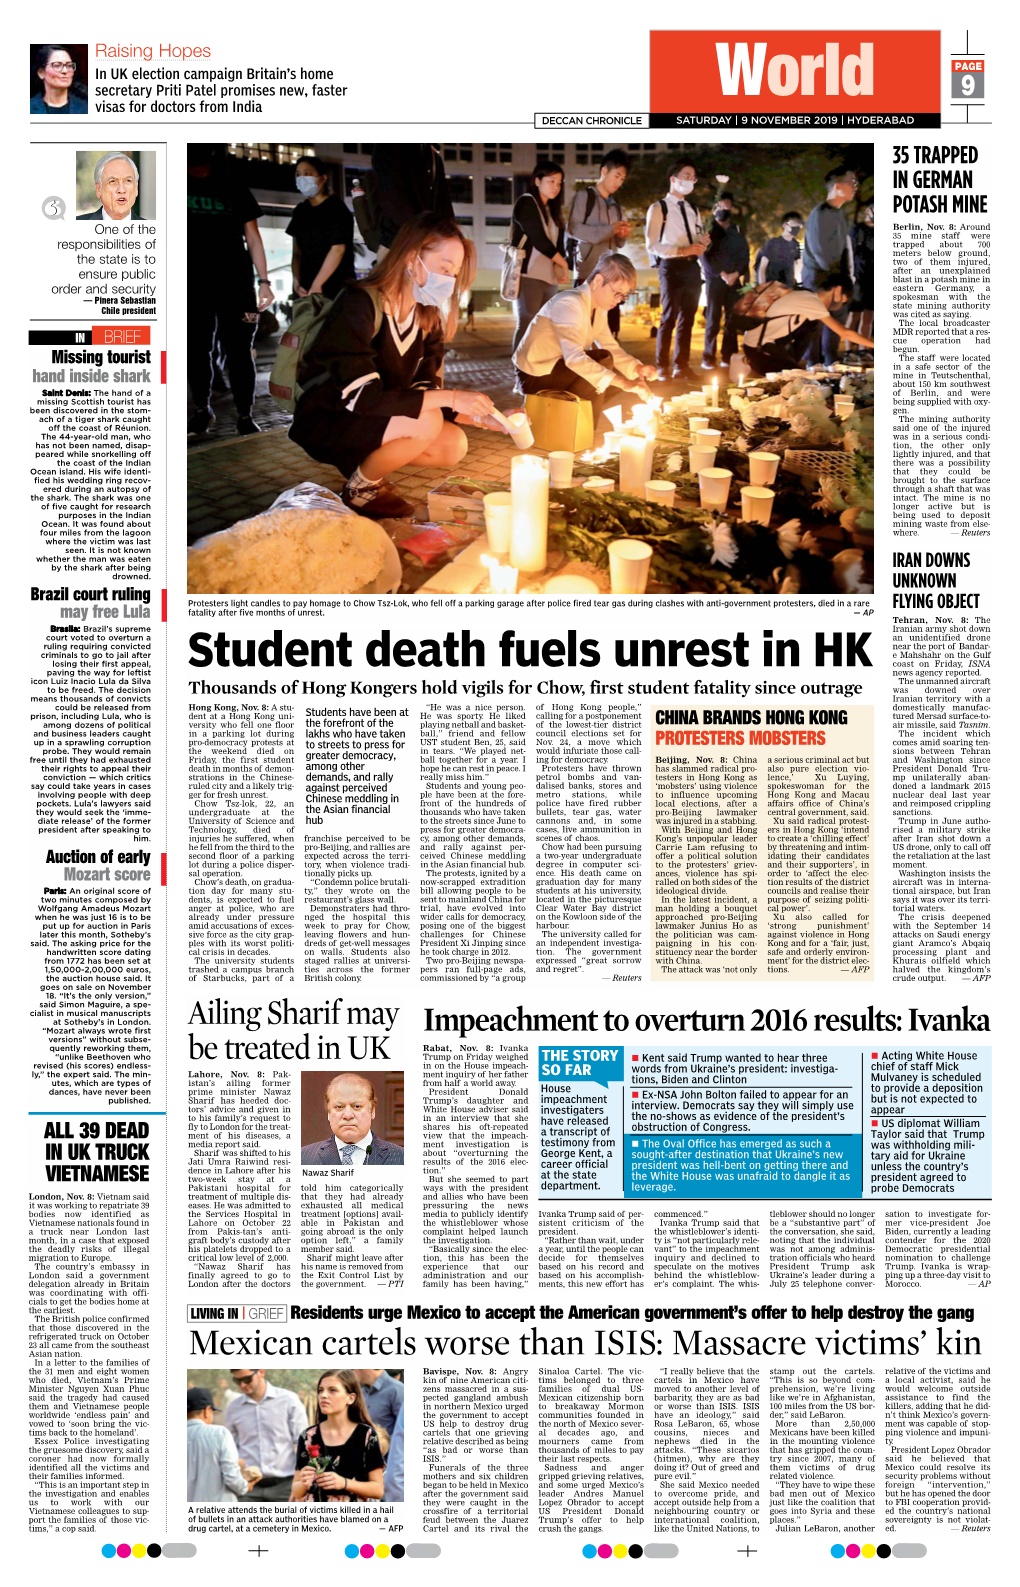 Student Death Fuels Unrest in HK Coast on Friday, ISNA Paving the Way for Leftist News Agency Reported